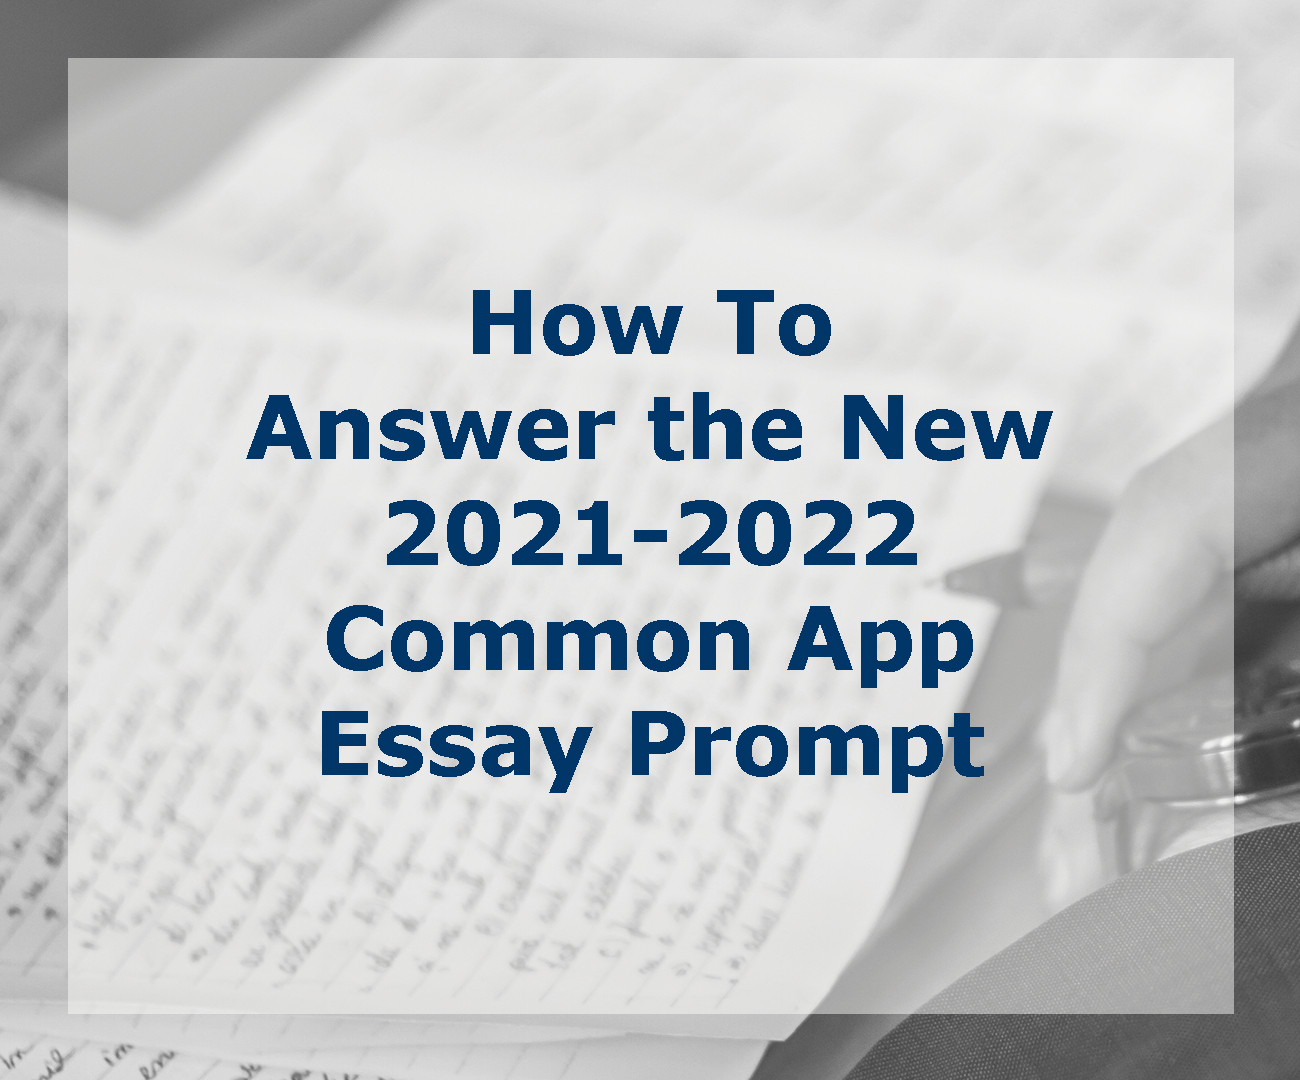 how many common app essay prompts do you answer